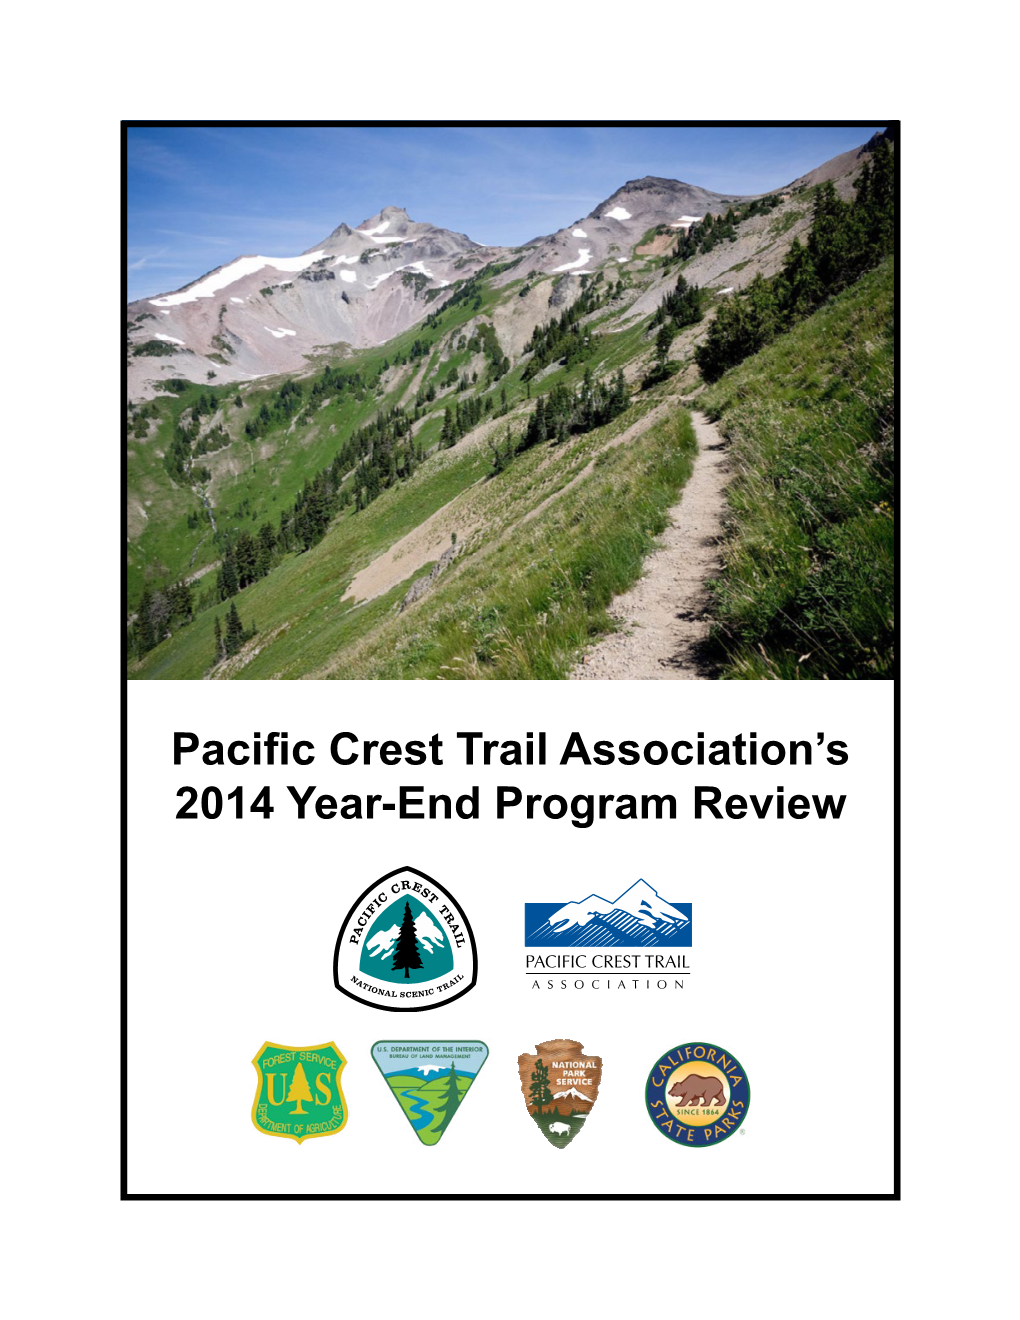 Pacific Crest Trail Association's 2014 Year-End Program Review